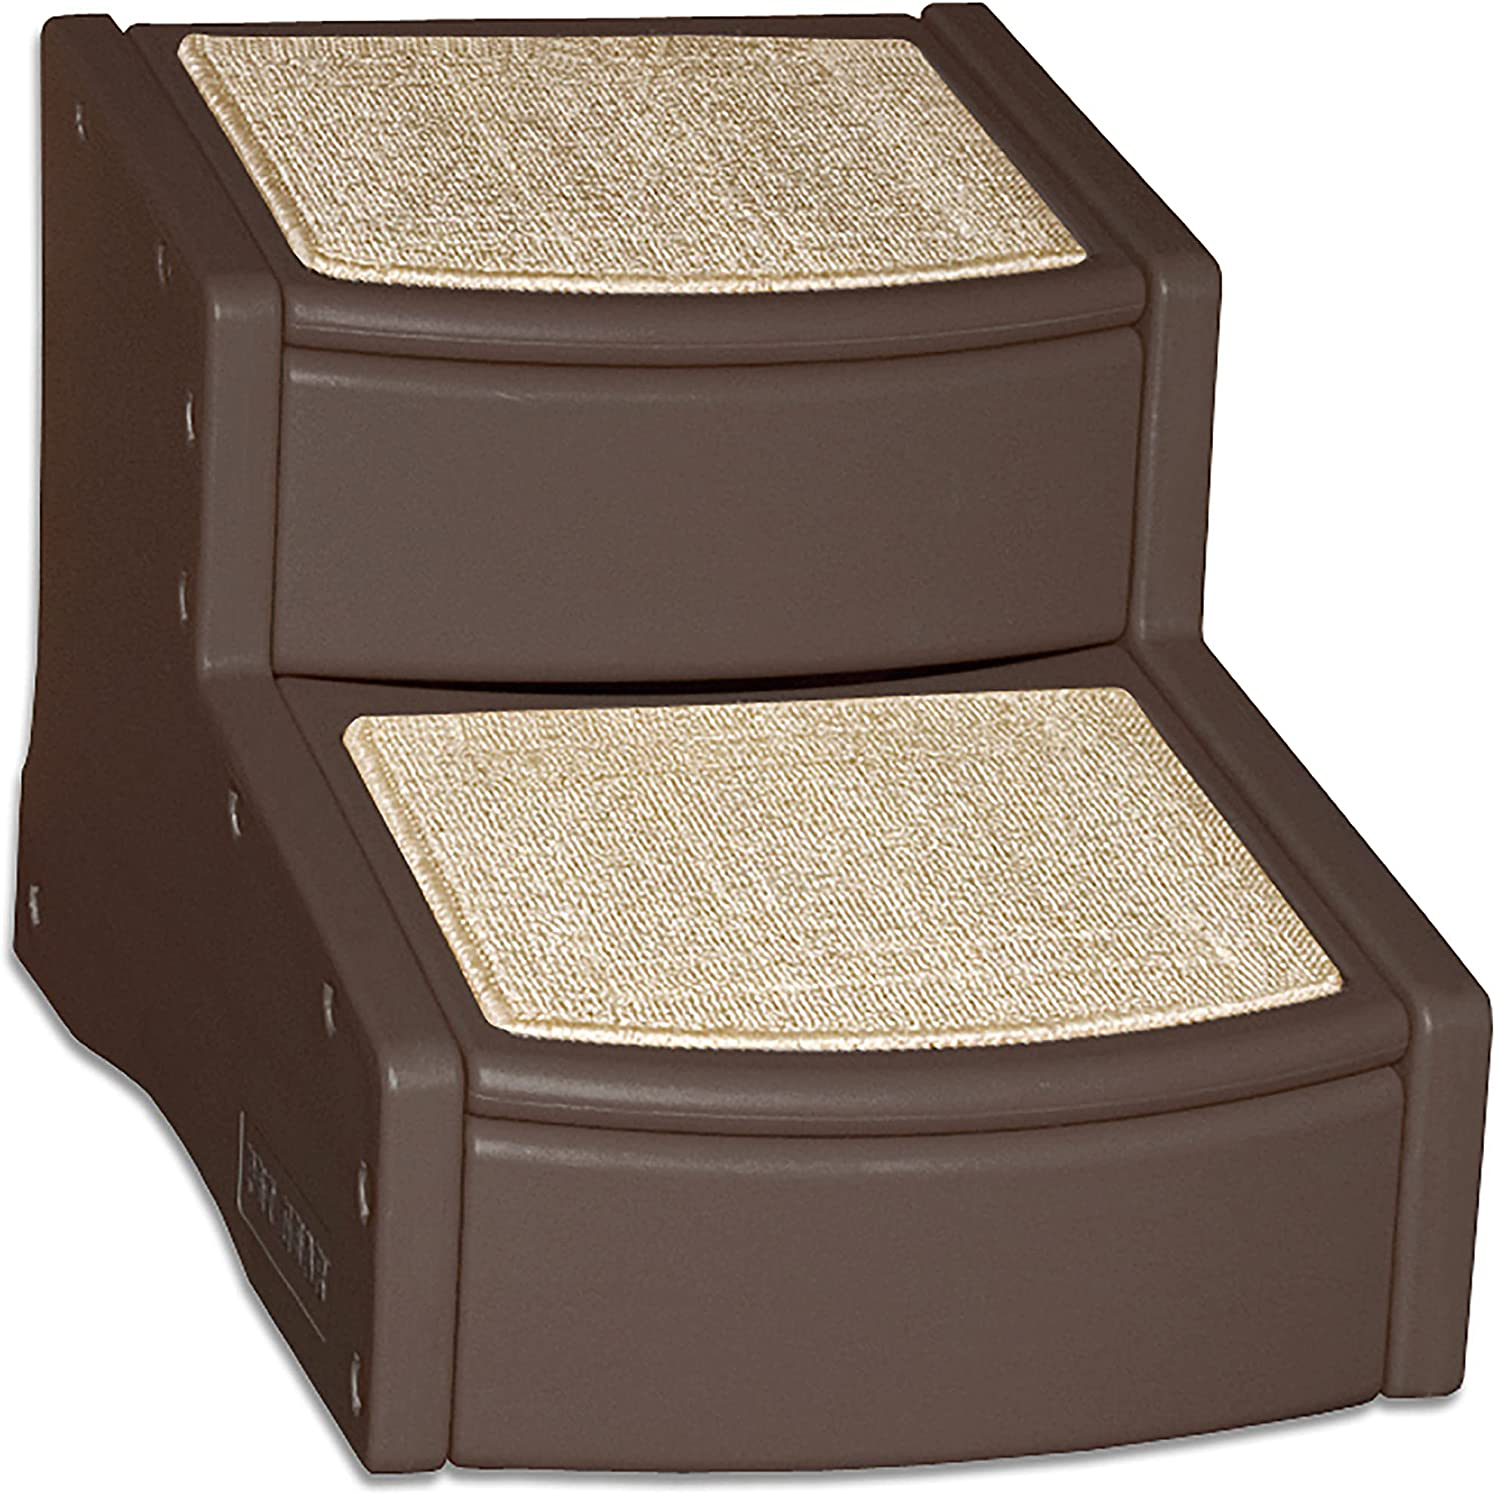 Pet Gear Easy Step II Pet Stairs, 2 Step for Cats/Dogs up to 150 Pounds, Portable, Removable Washable Carpet Tread, No Tools Required, Available in 5 Colors Animals & Pet Supplies > Pet Supplies > Dog Supplies > Dog Treadmills Pet Gear Chocolate  